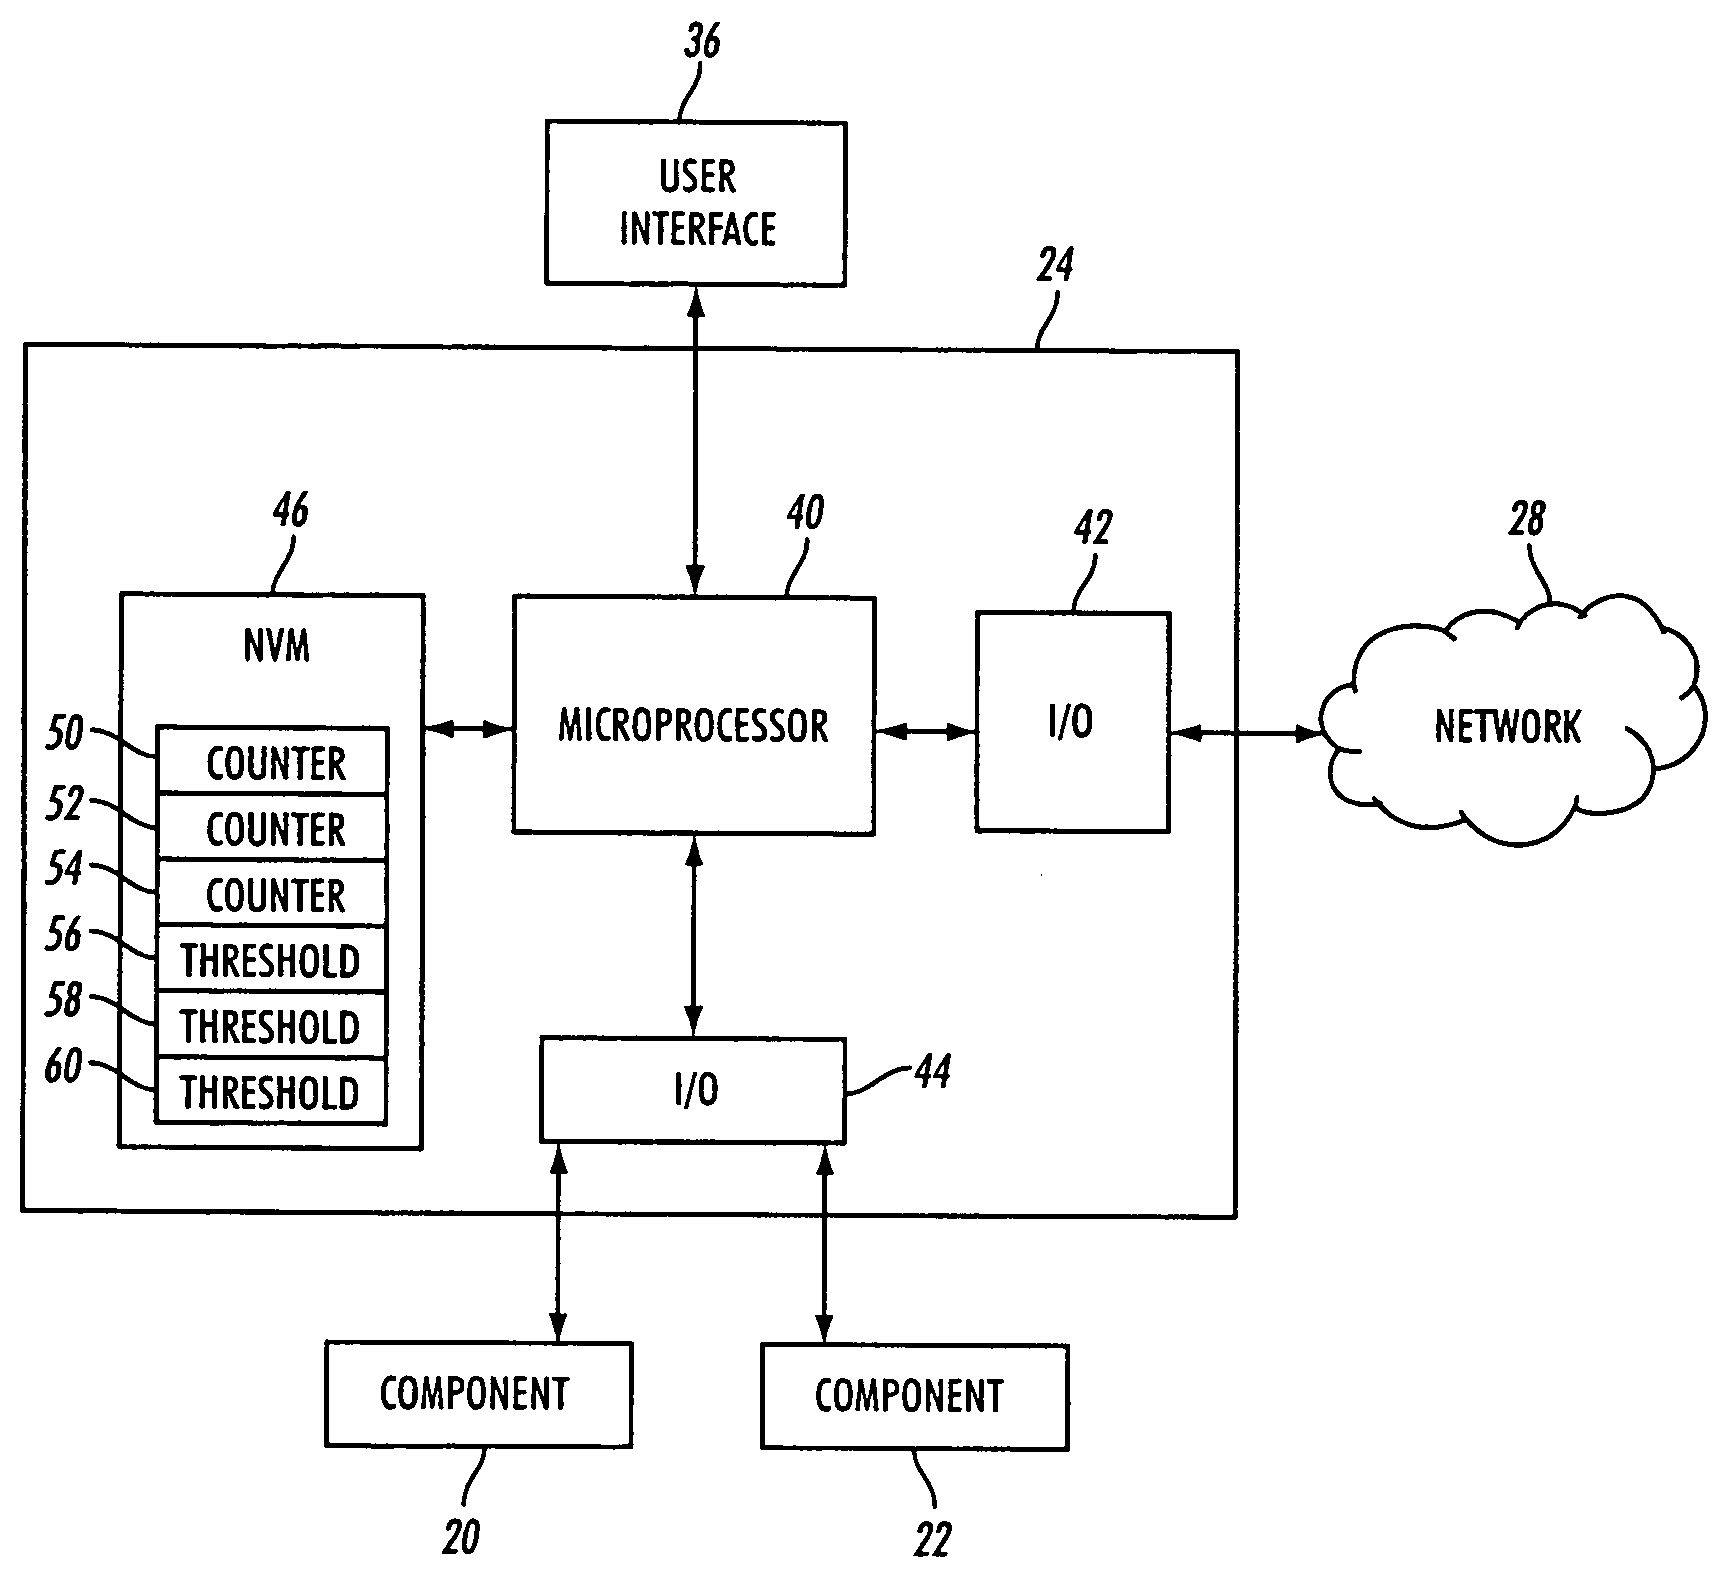 Automated detection and notification of the need for service and/or supplies replenishment in a machine